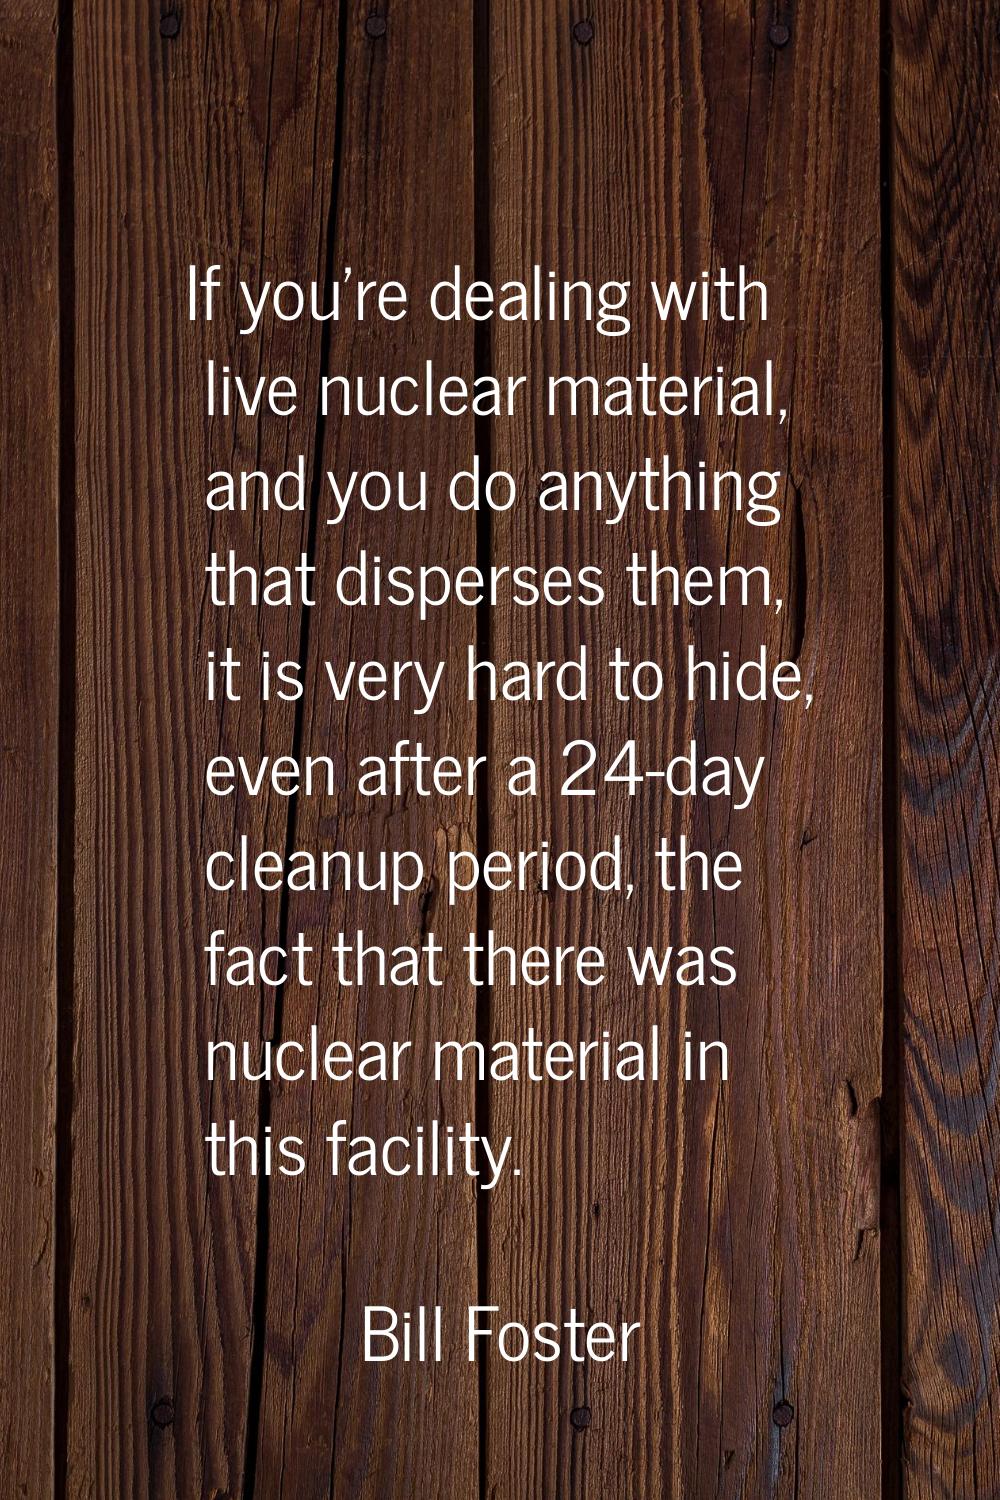 If you're dealing with live nuclear material, and you do anything that disperses them, it is very h